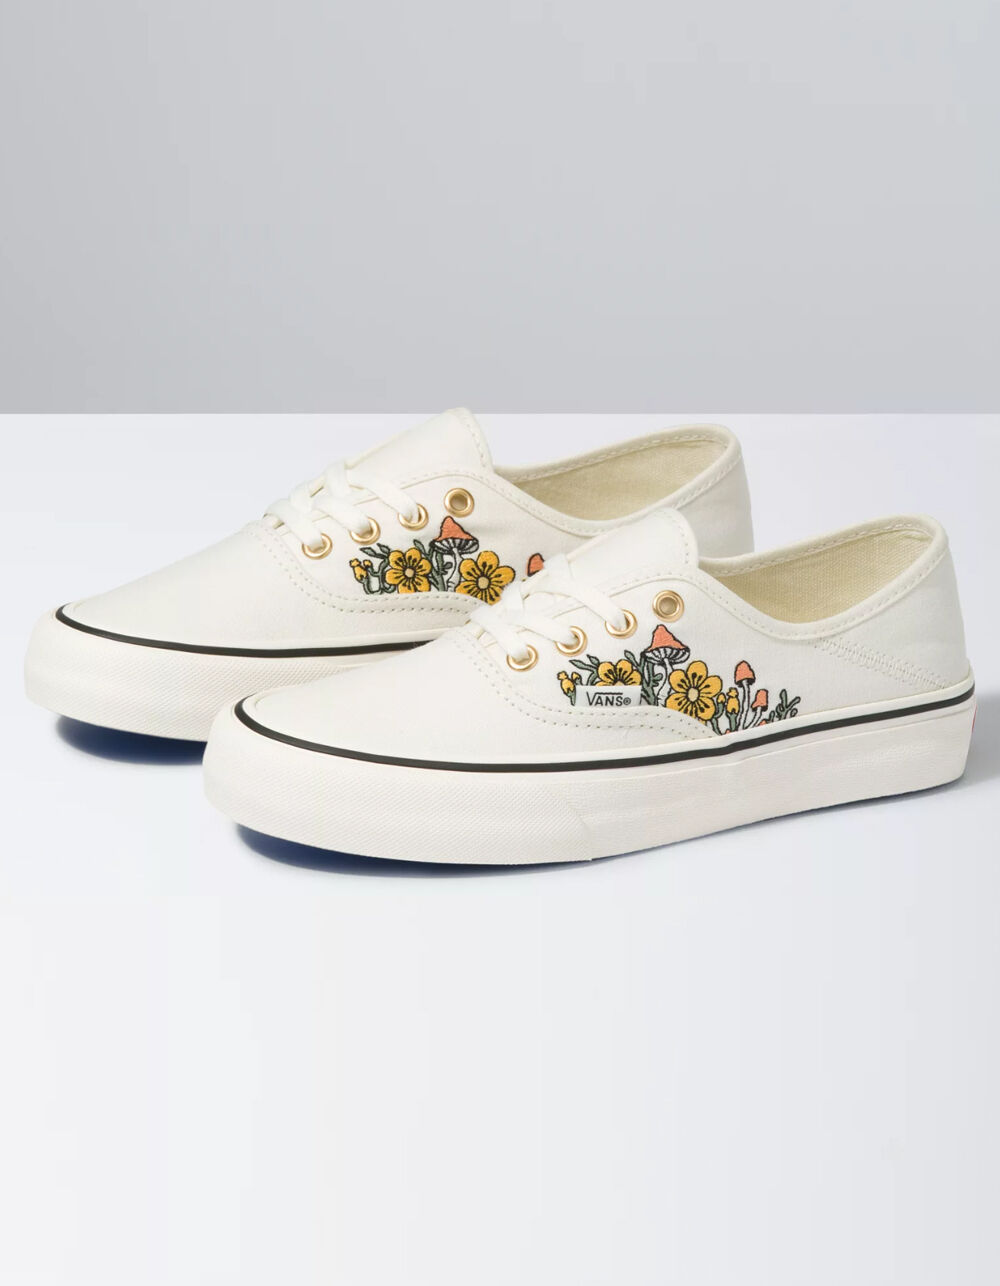 VANS Trippy Floral Authentic SF Womens Shoes - CREAM COMBO | Tillys